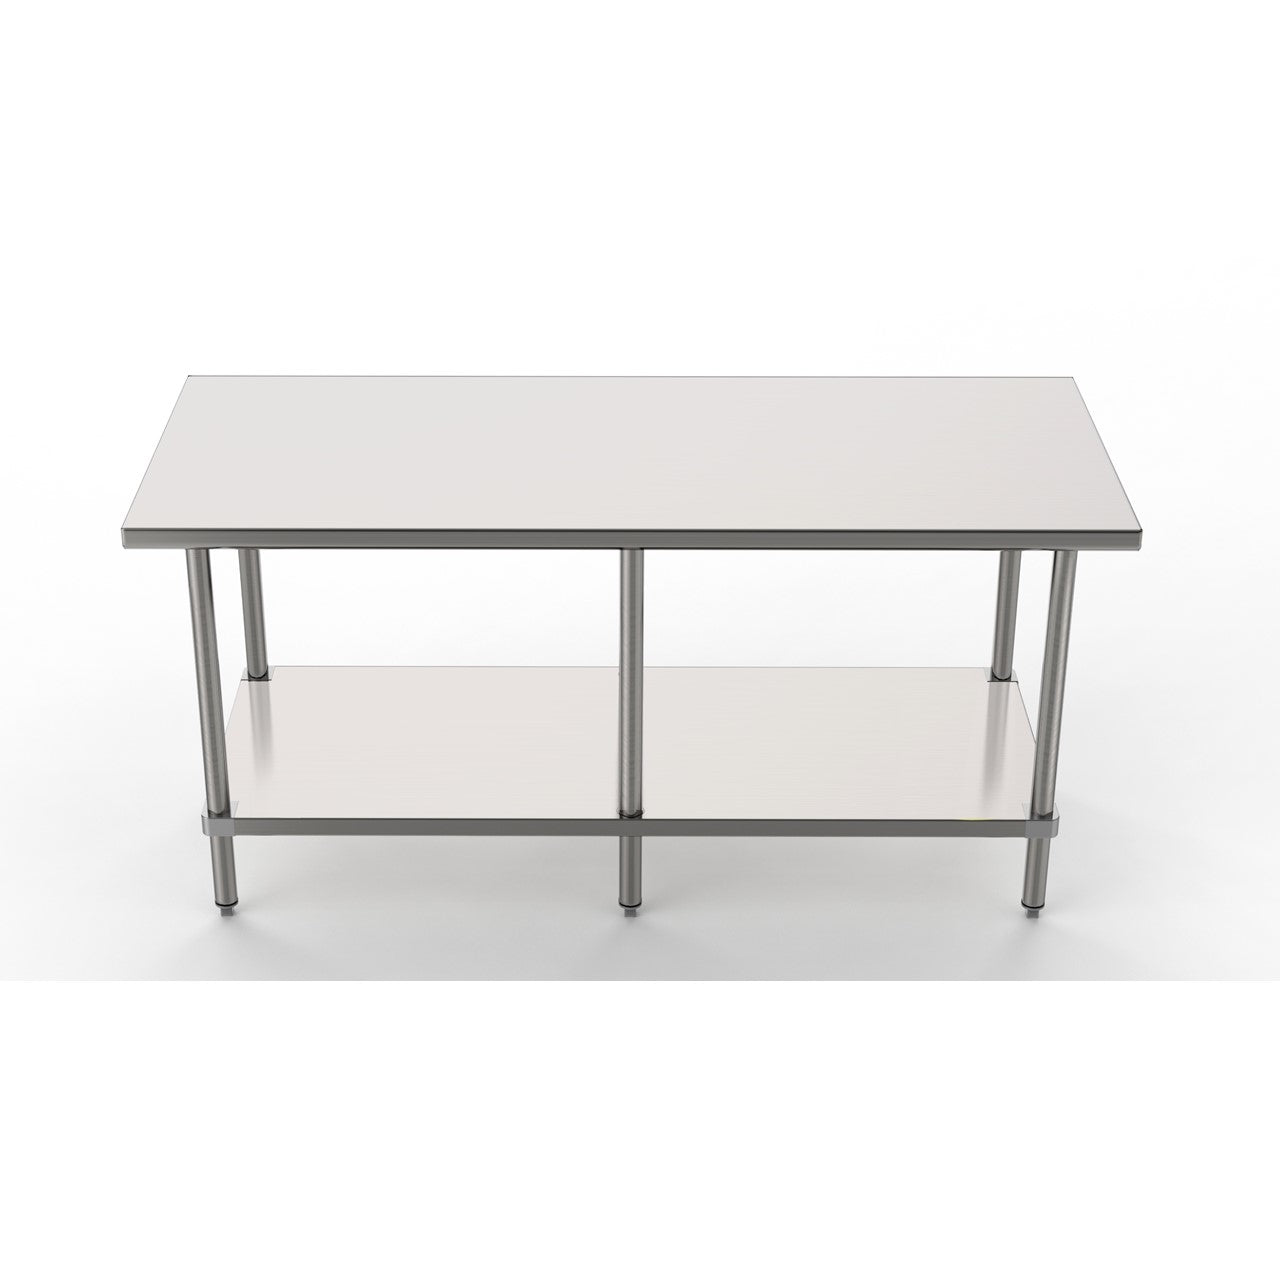 GSW Commercial Grade Flat Top Work Table with Stainless Steel Top, Galvanized Undershelf & Legs, Adjustable Bullet Feet, Perfect for Restaurant, Home, Office, Kitchen or Garage, NSF Approved (24"W x 96"L x 35"H)